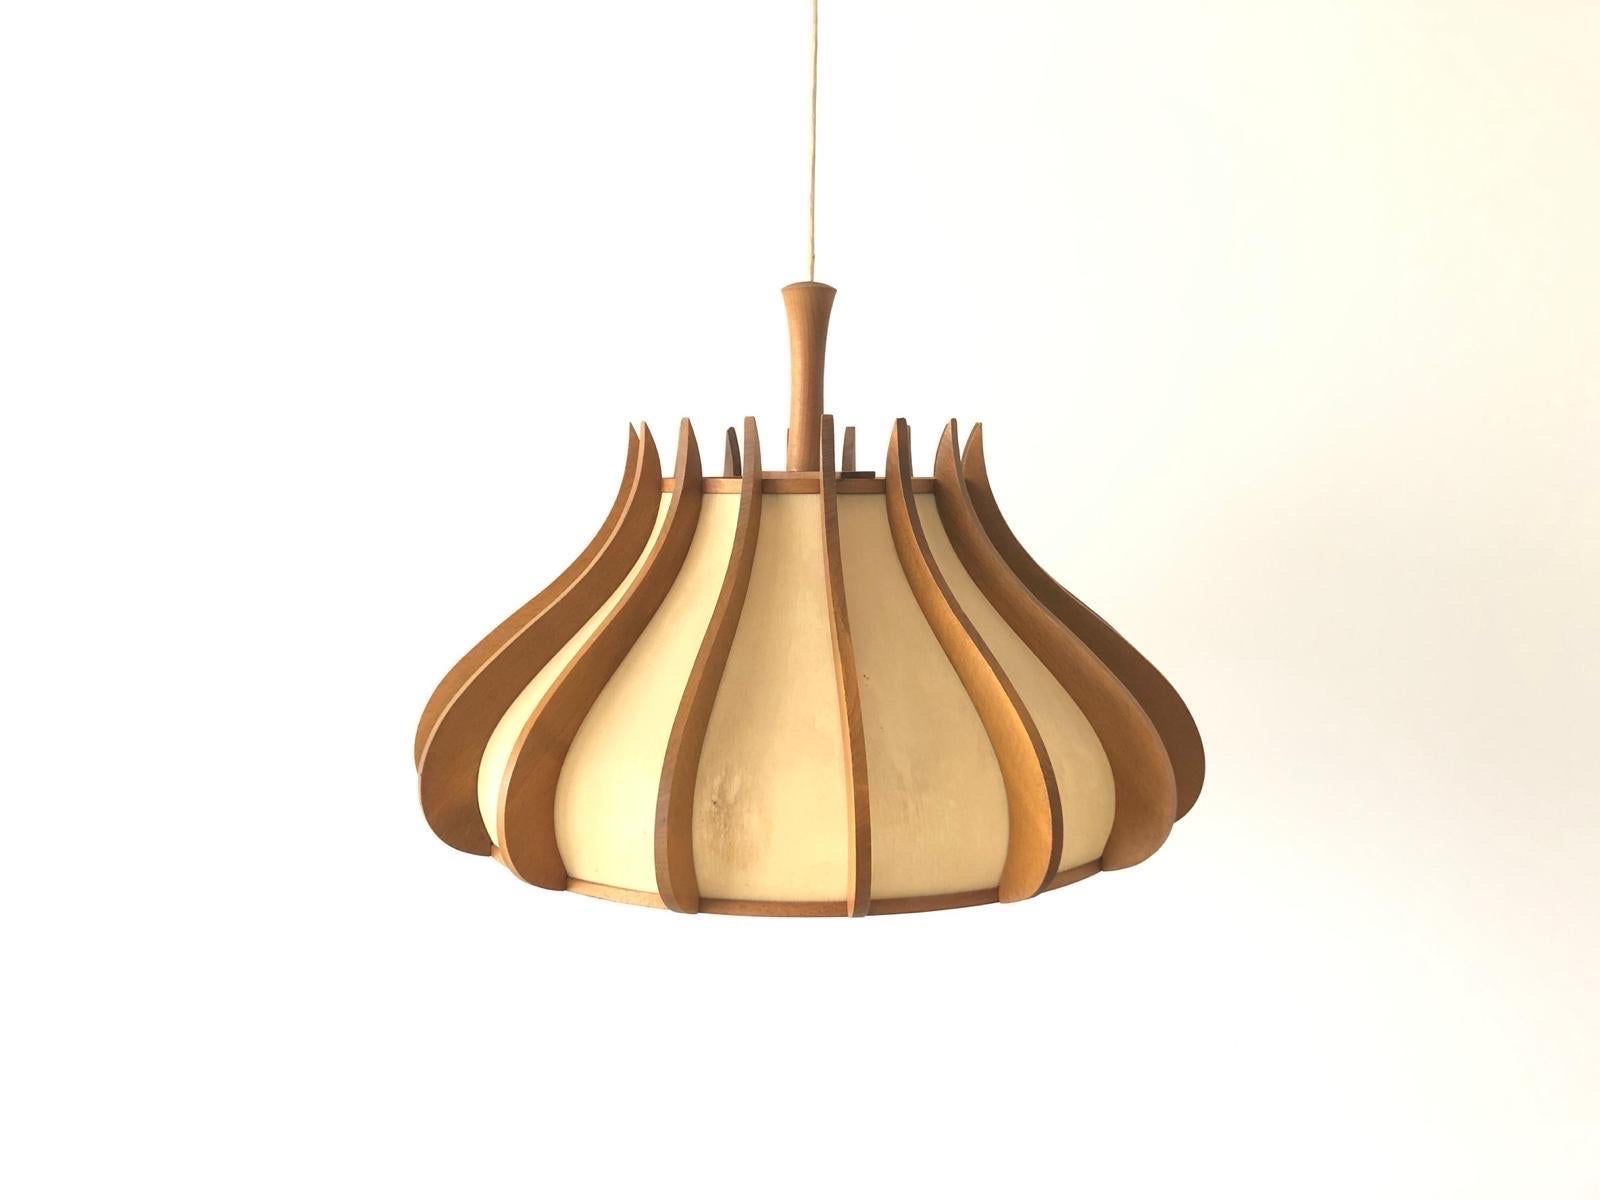 Unusual design Wood and Plastic Paper Large Pendant Lamp, 1960s, Germany For Sale 6